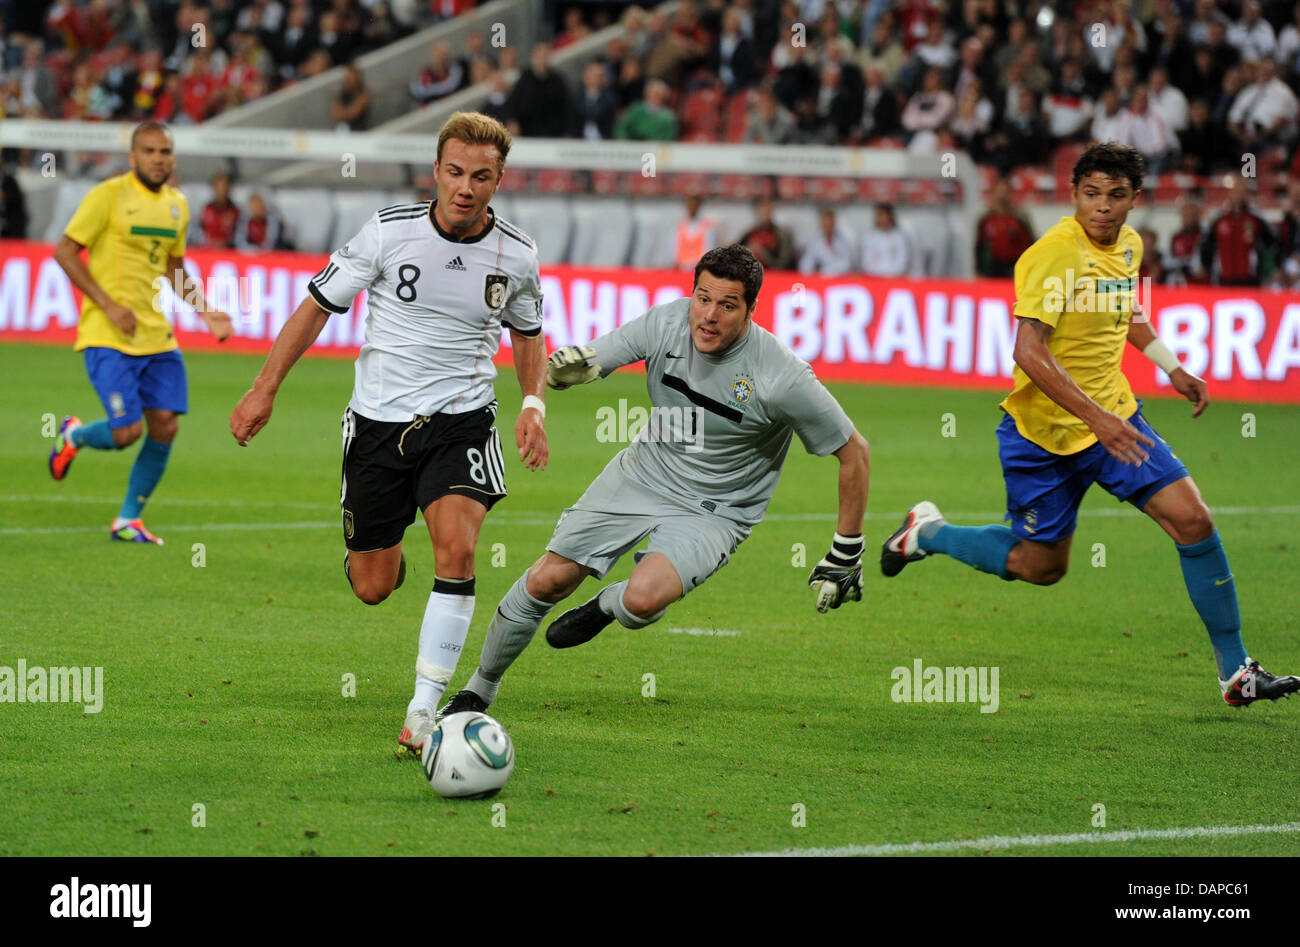 Germany's Mario Goetze (2-L) scores the 2-0 lead against Brazil's goalkeeper Julio Cesar (2-R) during the international friendly soccer match Germany vs Brazil at Mercedes-Benz Arena in Stuttgart, Germany, 10 August 2011. Foto: Uli Deck dpa/lswy  +++(c) dpa - Bildfunk+++ Stock Photo